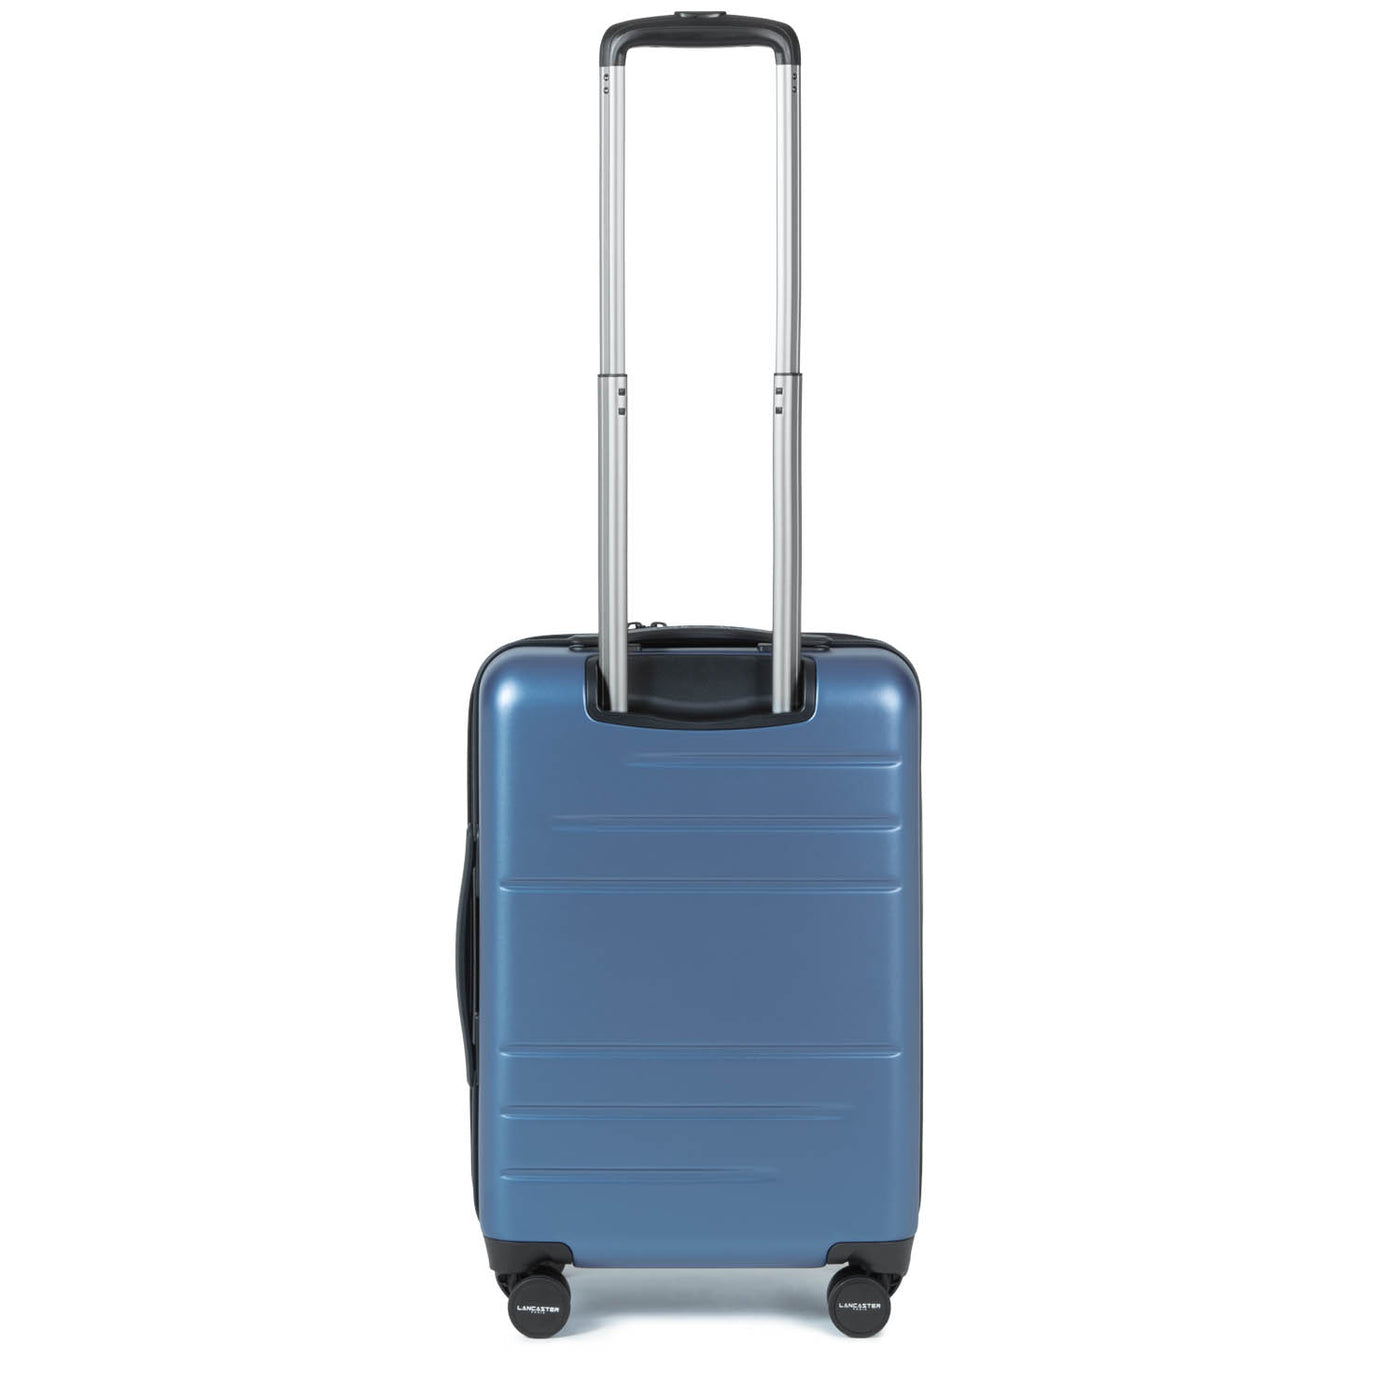 assortment of 3 luggage - luggage #couleur_bleu-mer